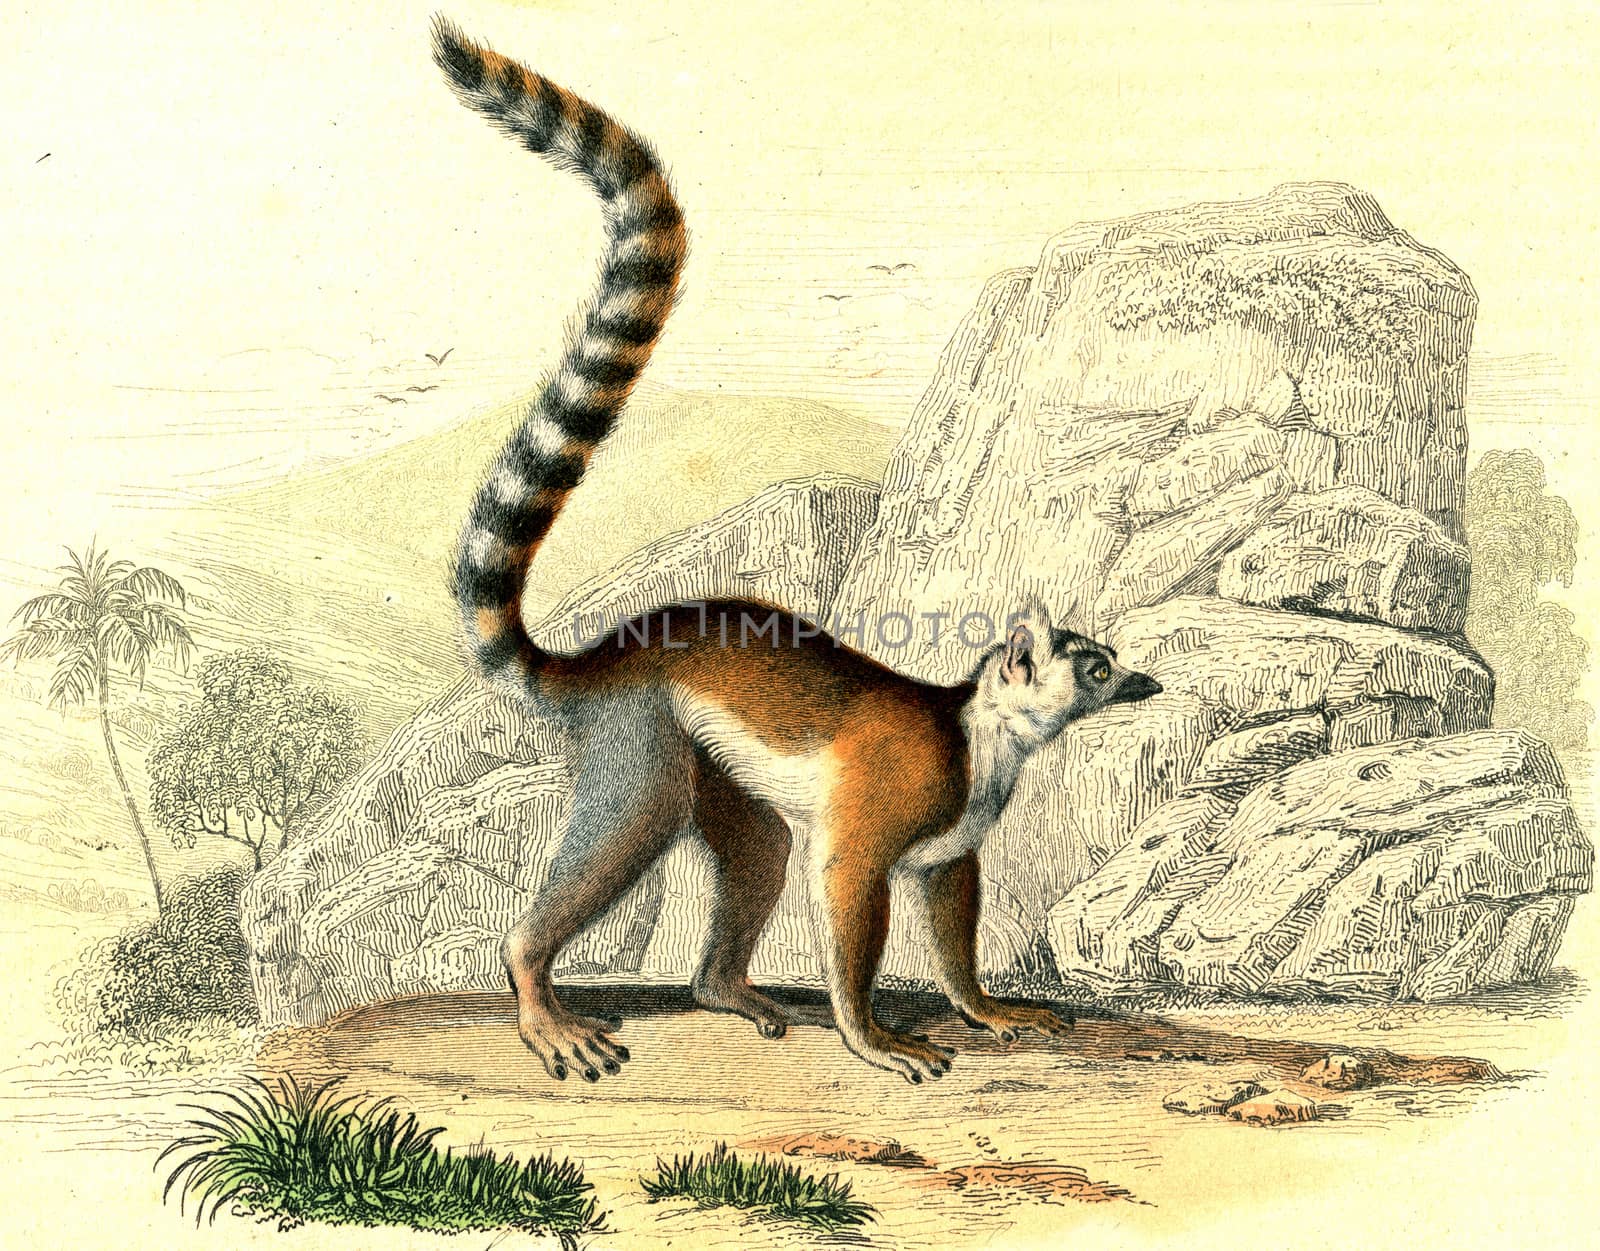 Ring-tailed lemur, vintage engraved illustration. From Buffon Complete Work.
